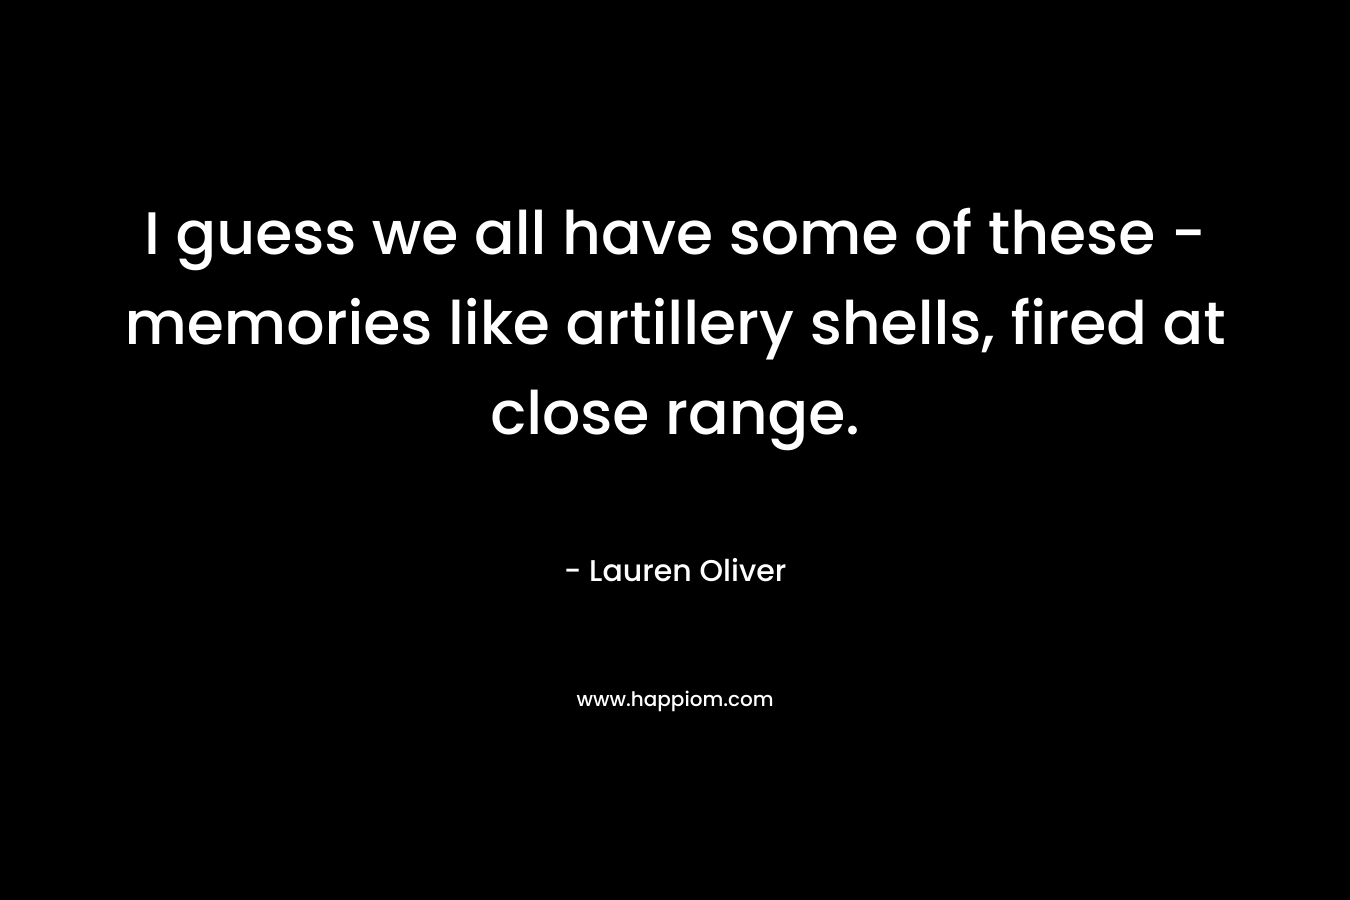 I guess we all have some of these - memories like artillery shells, fired at close range.